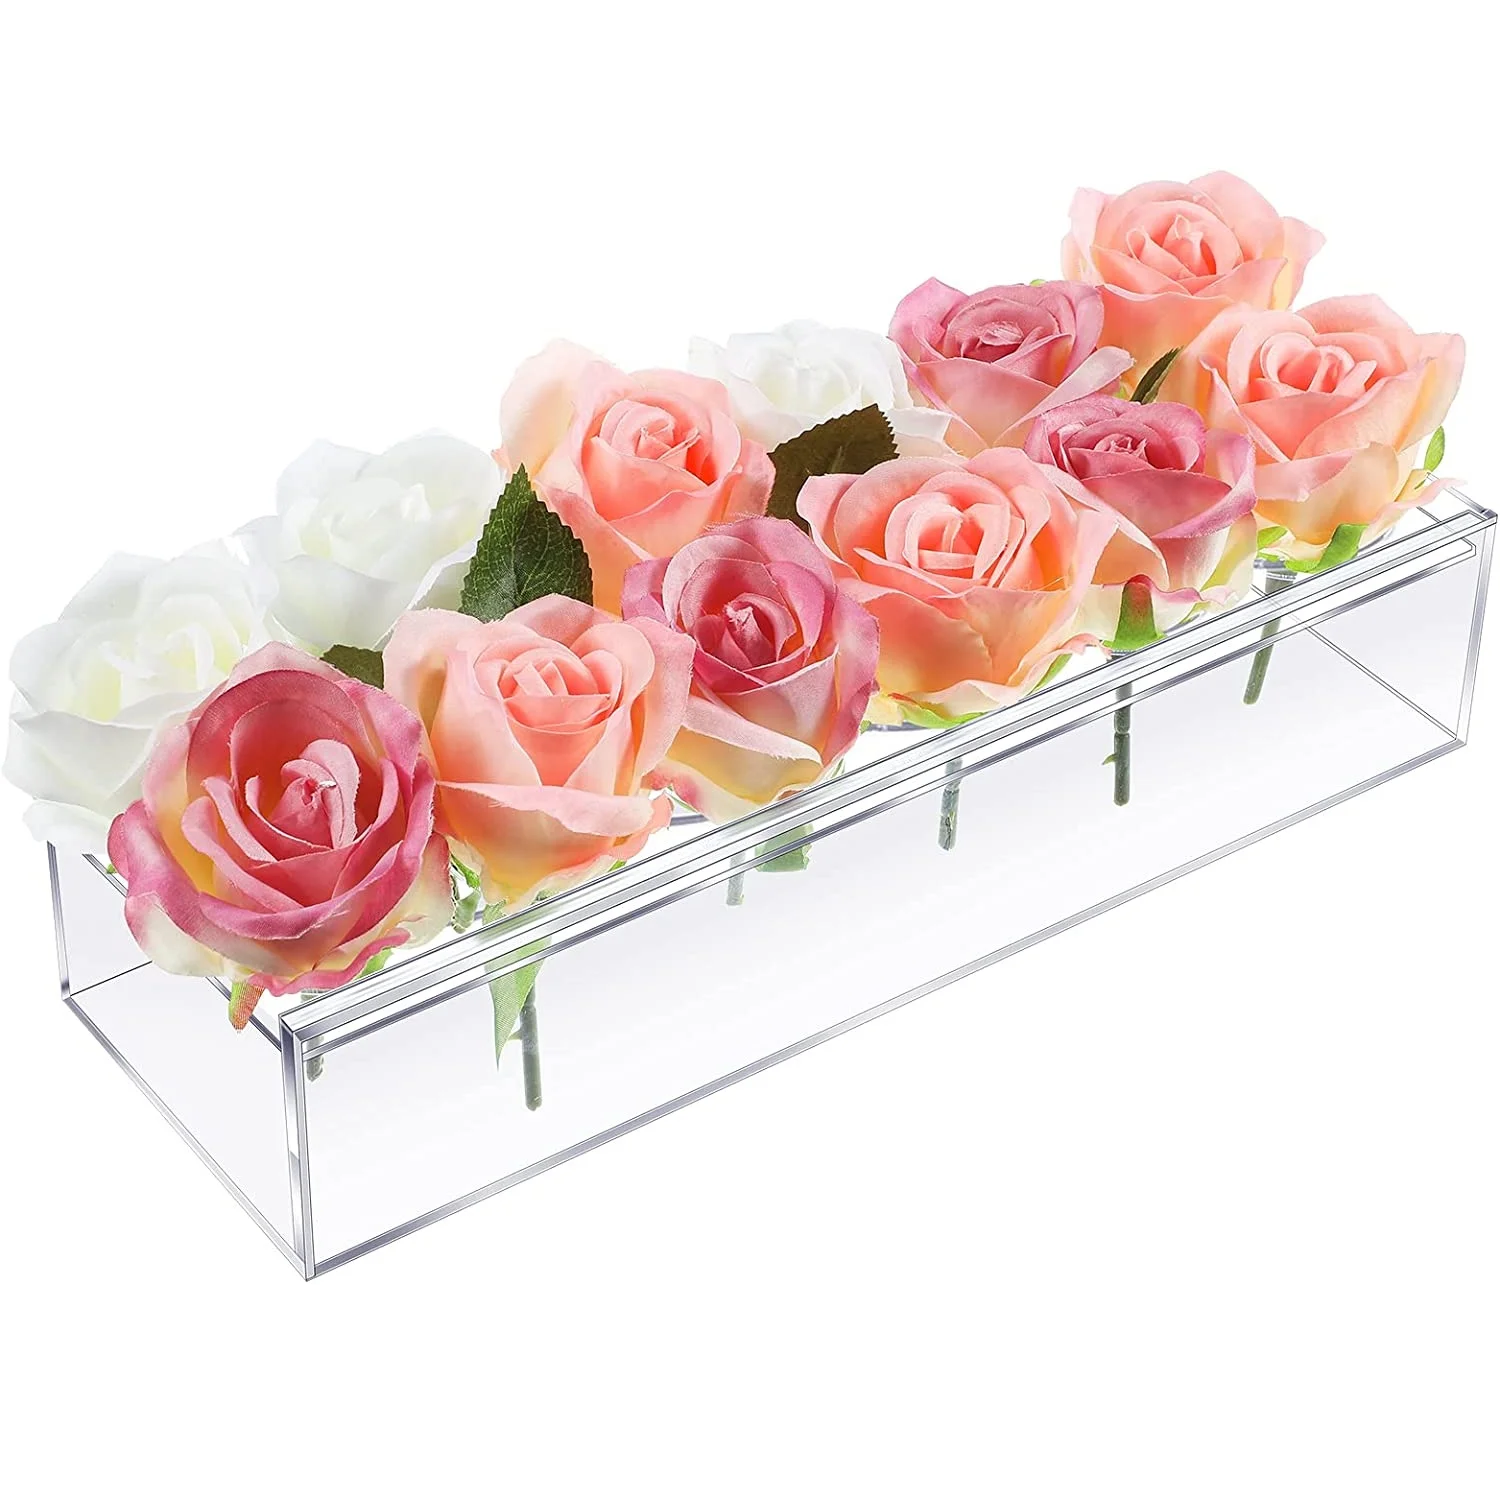 

Clear Acrylic Flower Vase Rectangular Floral Centerpiece for Dining Table 12 Inch Long Modern Vase for Weddings Home Decorate